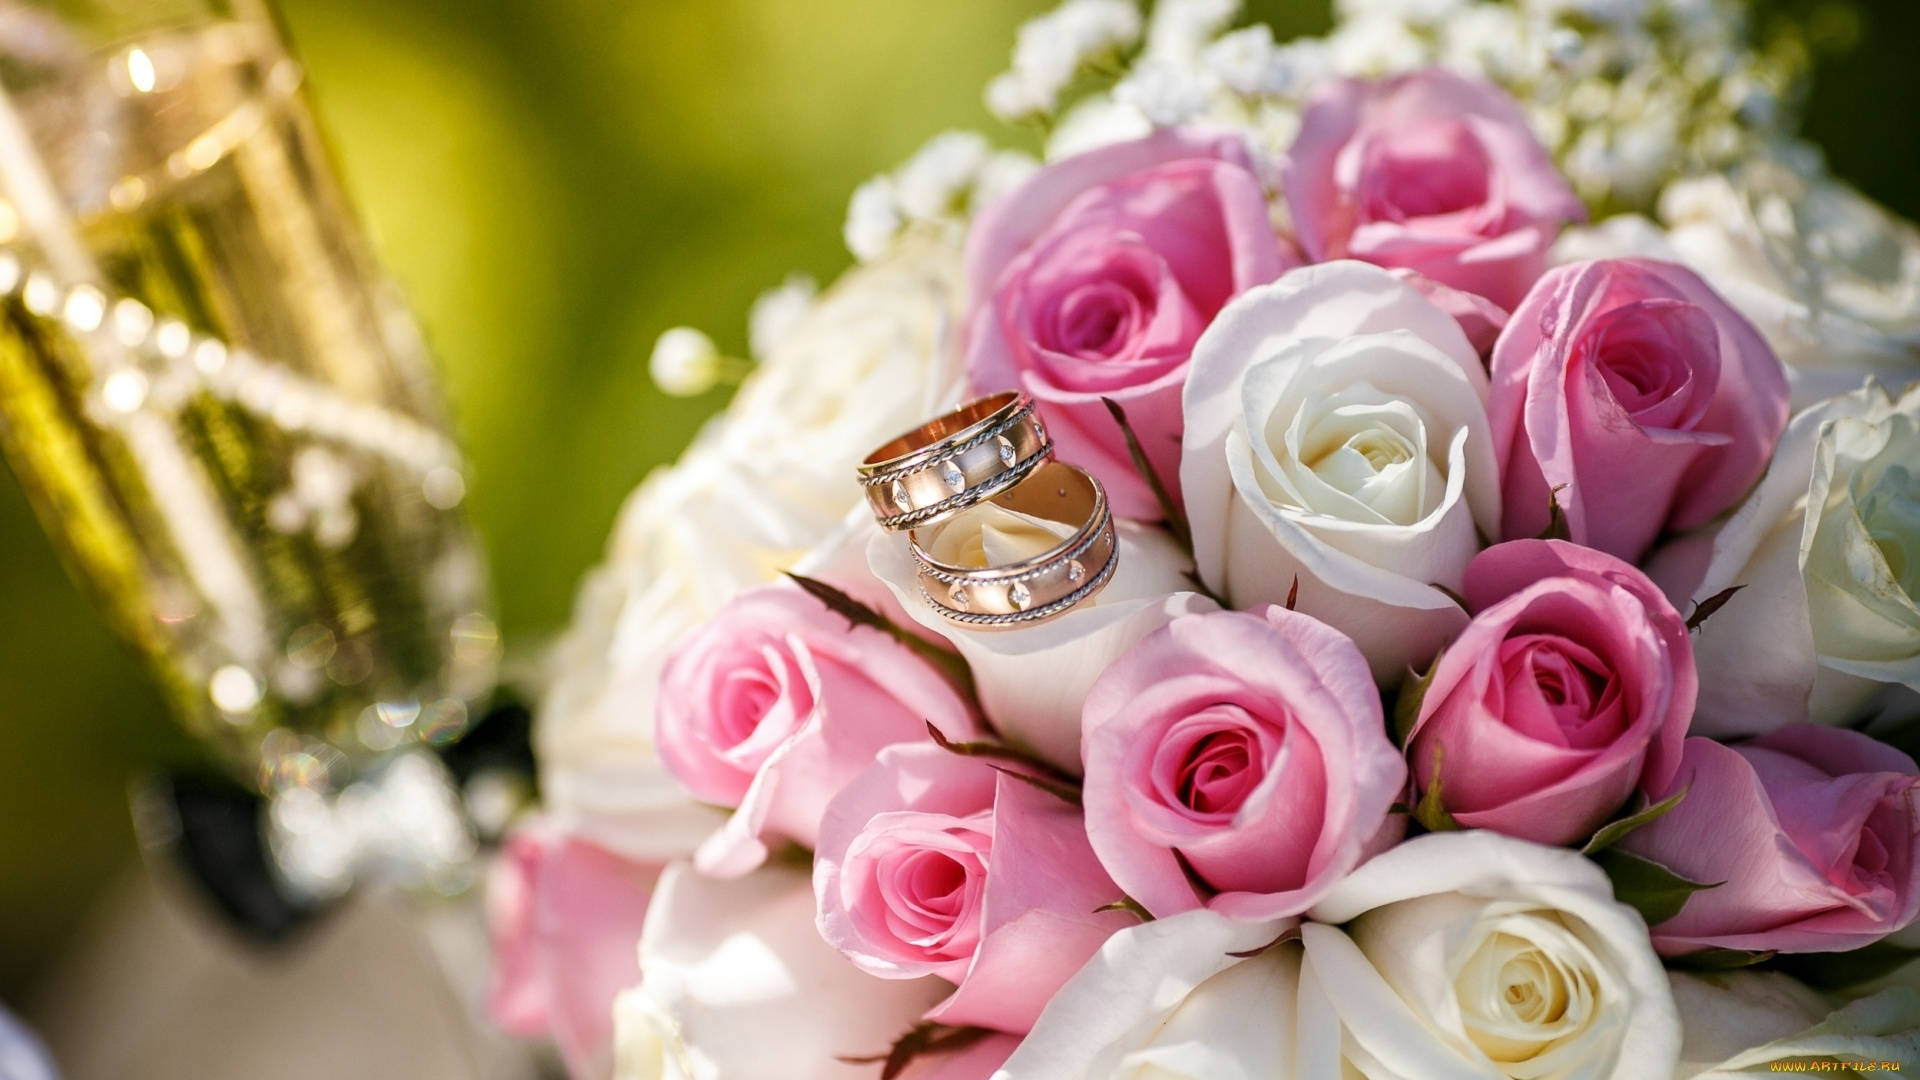 1920x1080 Download Wedding Rings On Bouquet Wallpaper